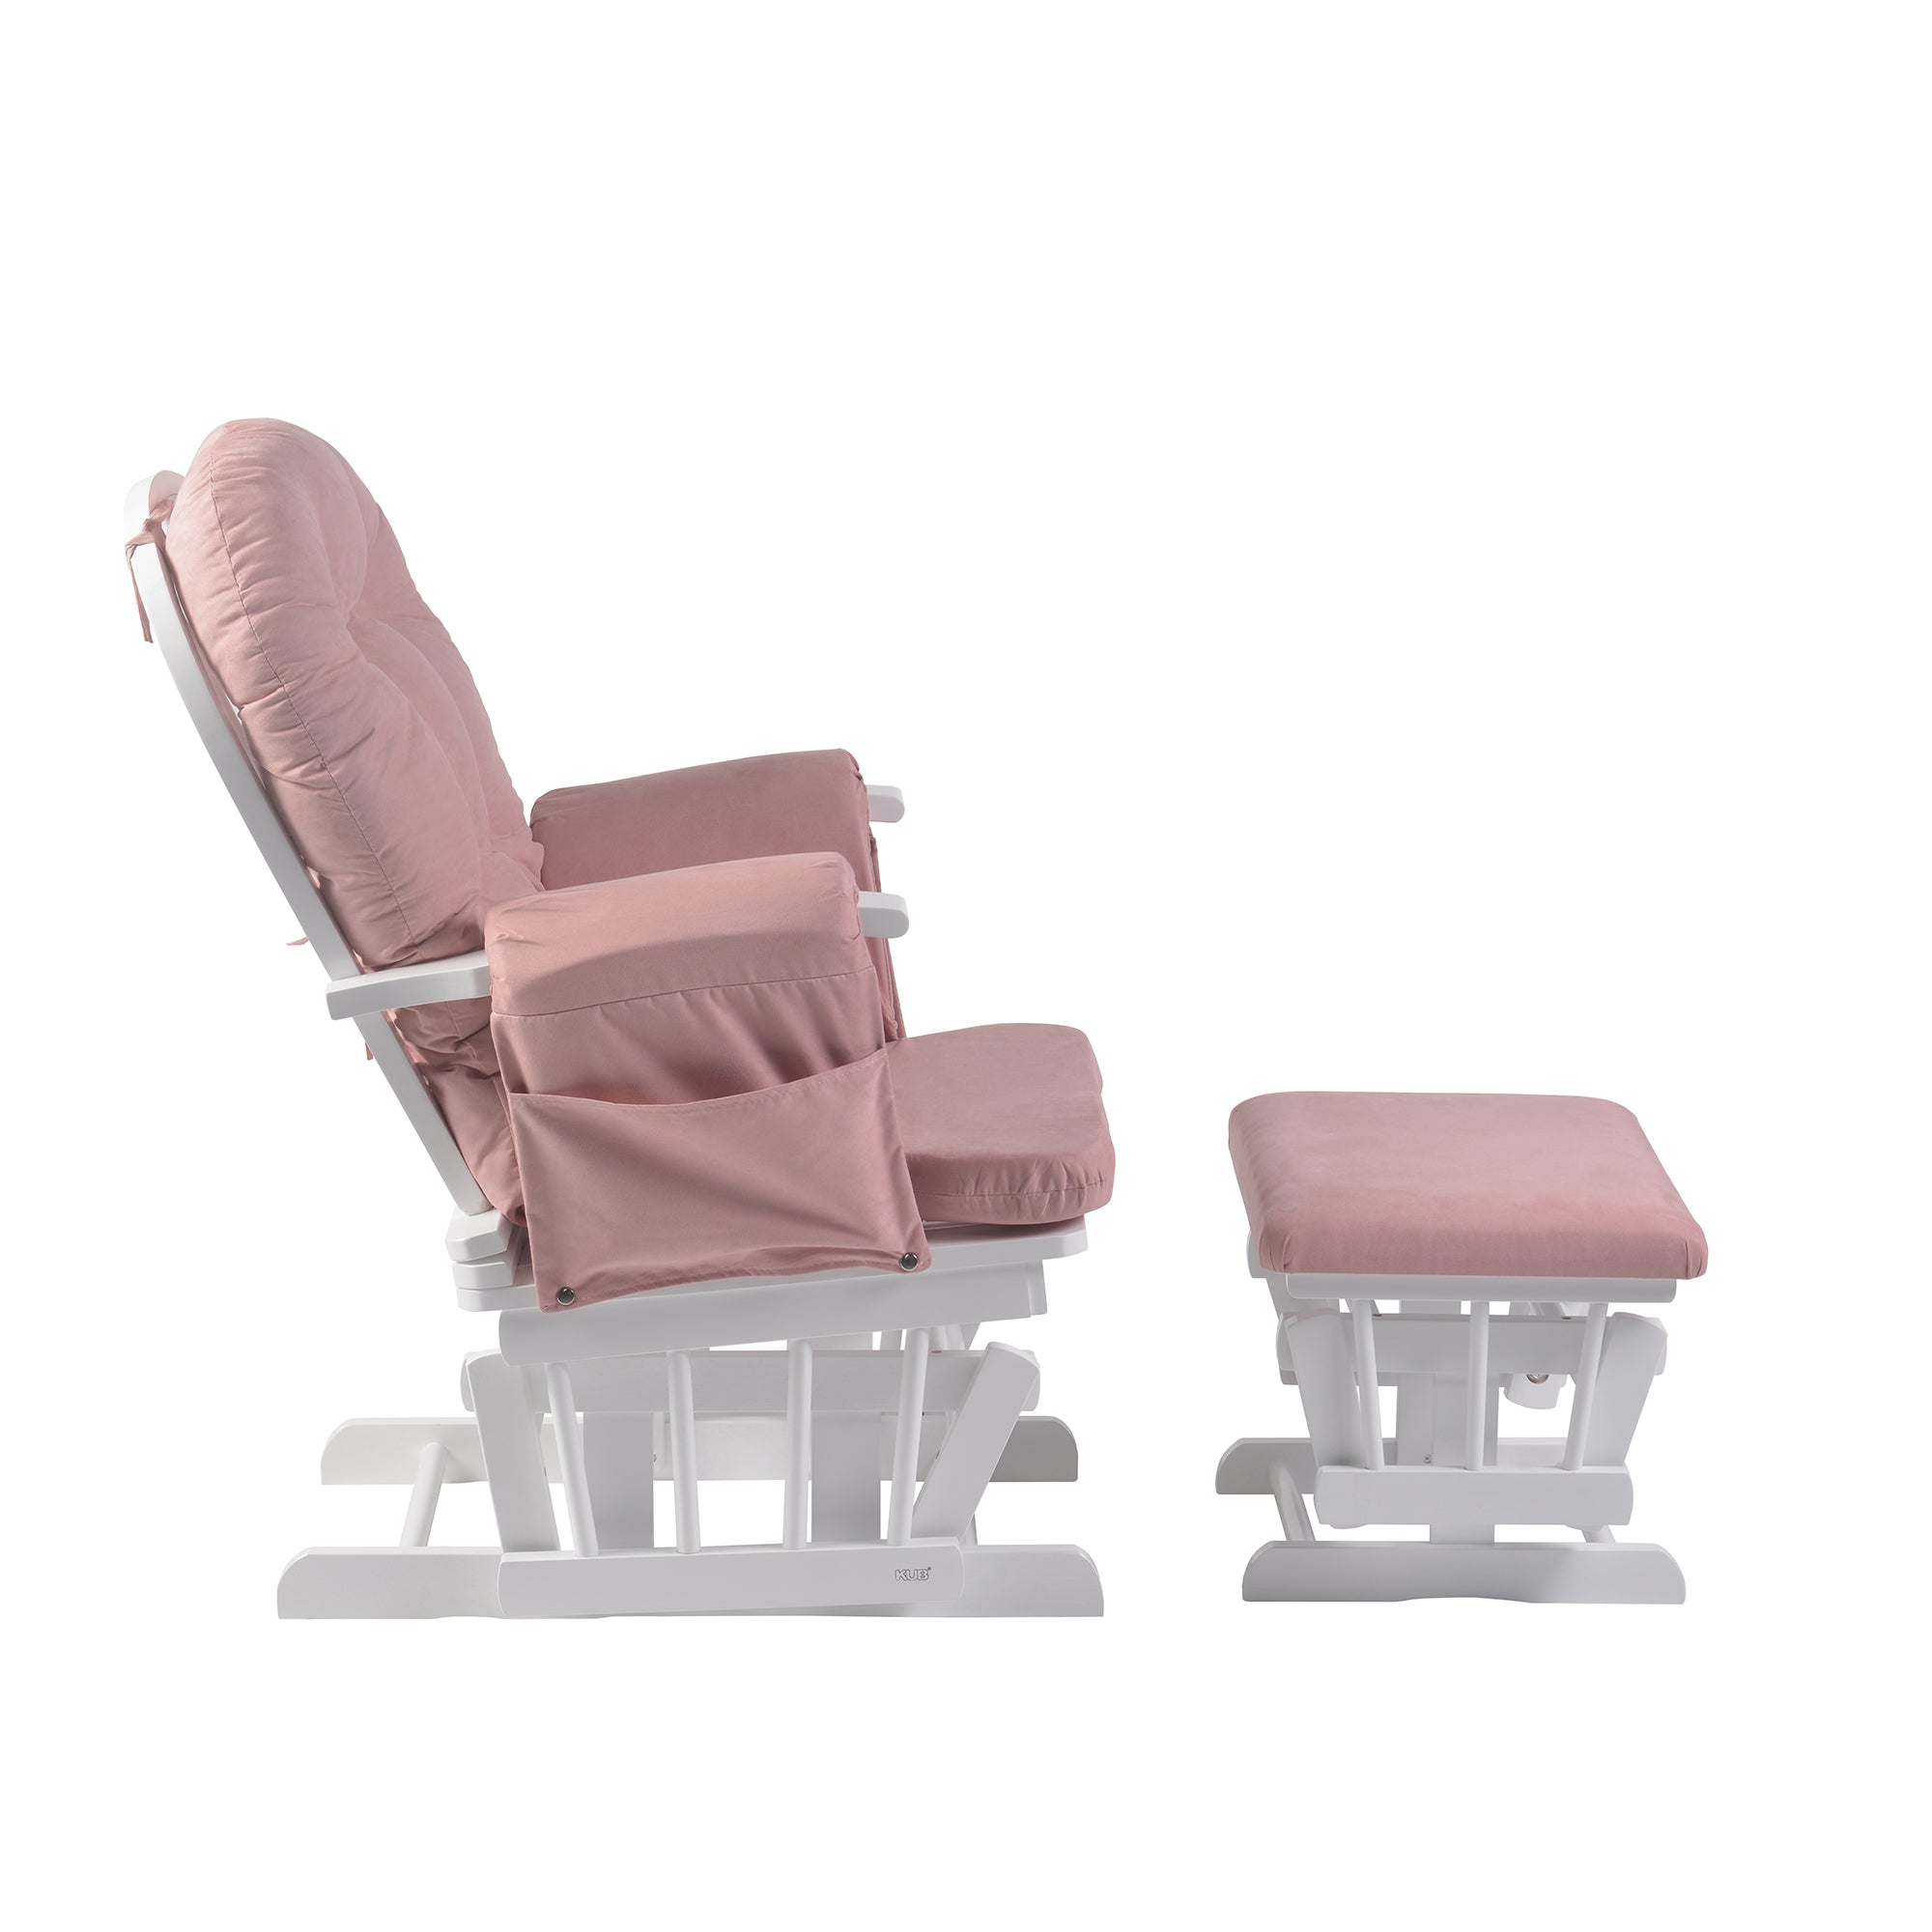 Haywood Reclining Nursing Chair and Footstool Dusky Pink